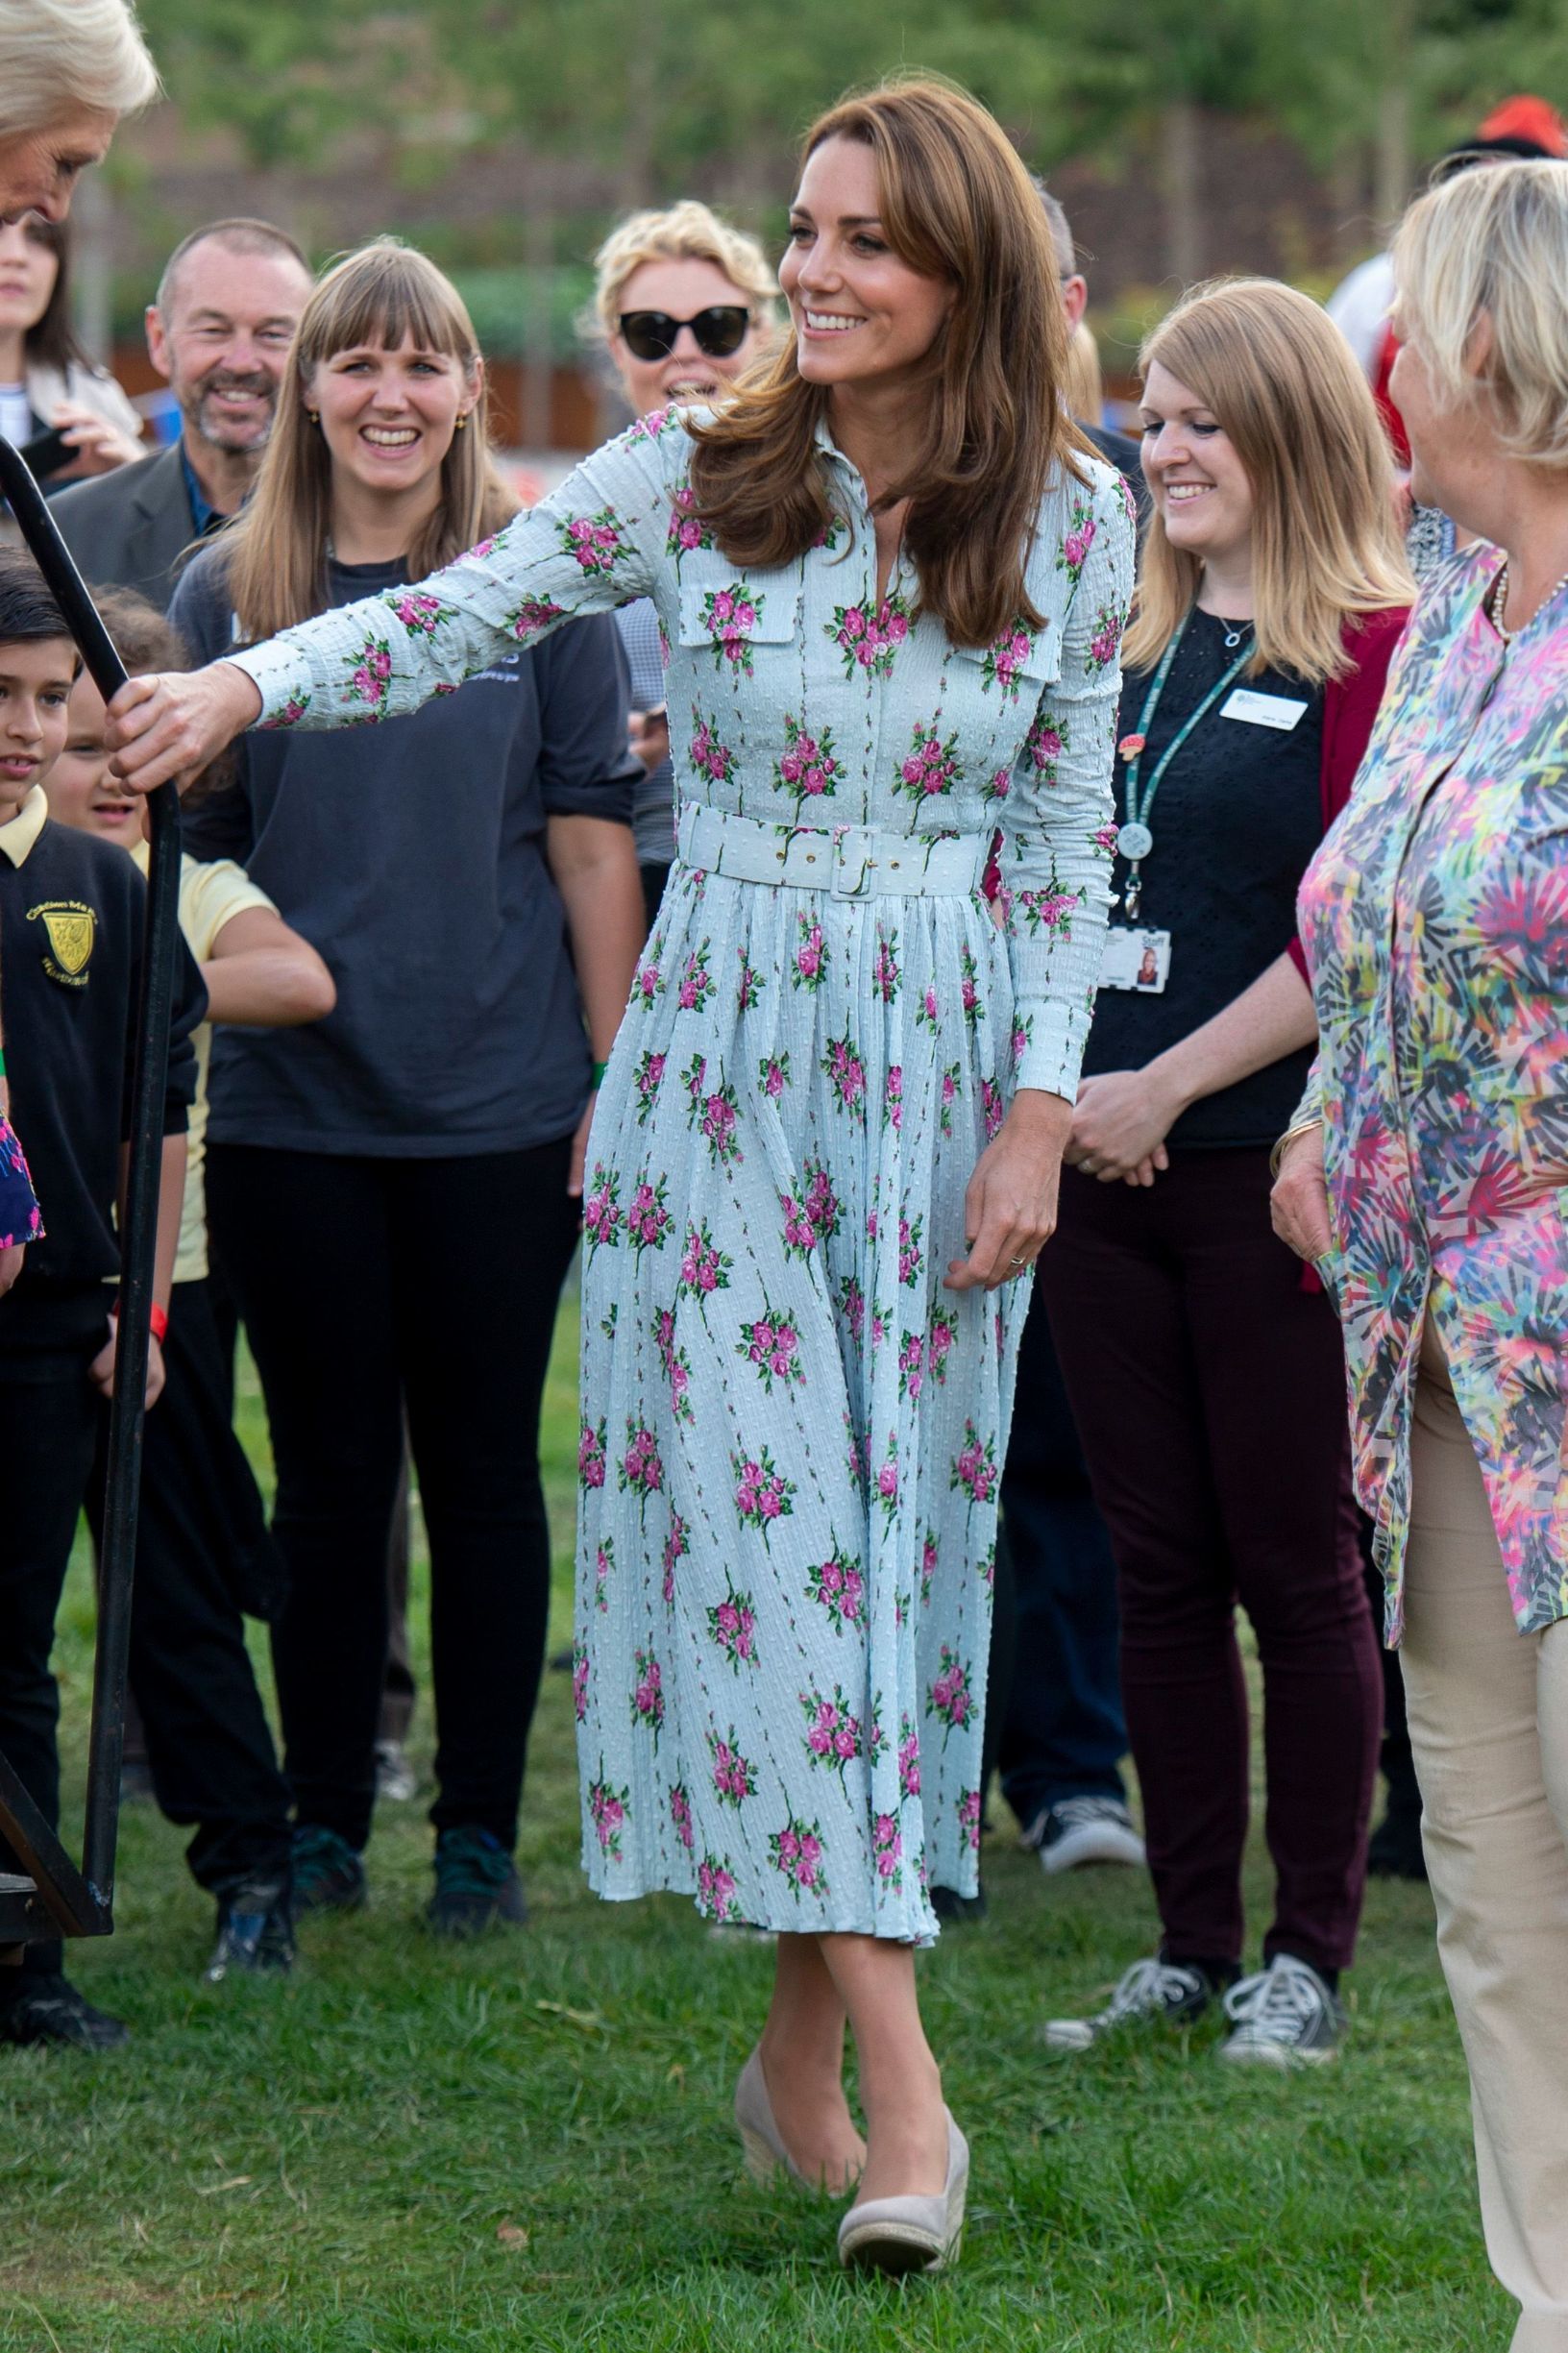 Catherine Duchess of Cambridge
Back to Nature Festival, RHS Garden Wisley, Woking, UK - 10 Sep 2019,Image: 470202152, License: Rights-managed, Restrictions: , Model Release: no, Credit line: - / Shutterstock Editorial / Profimedia